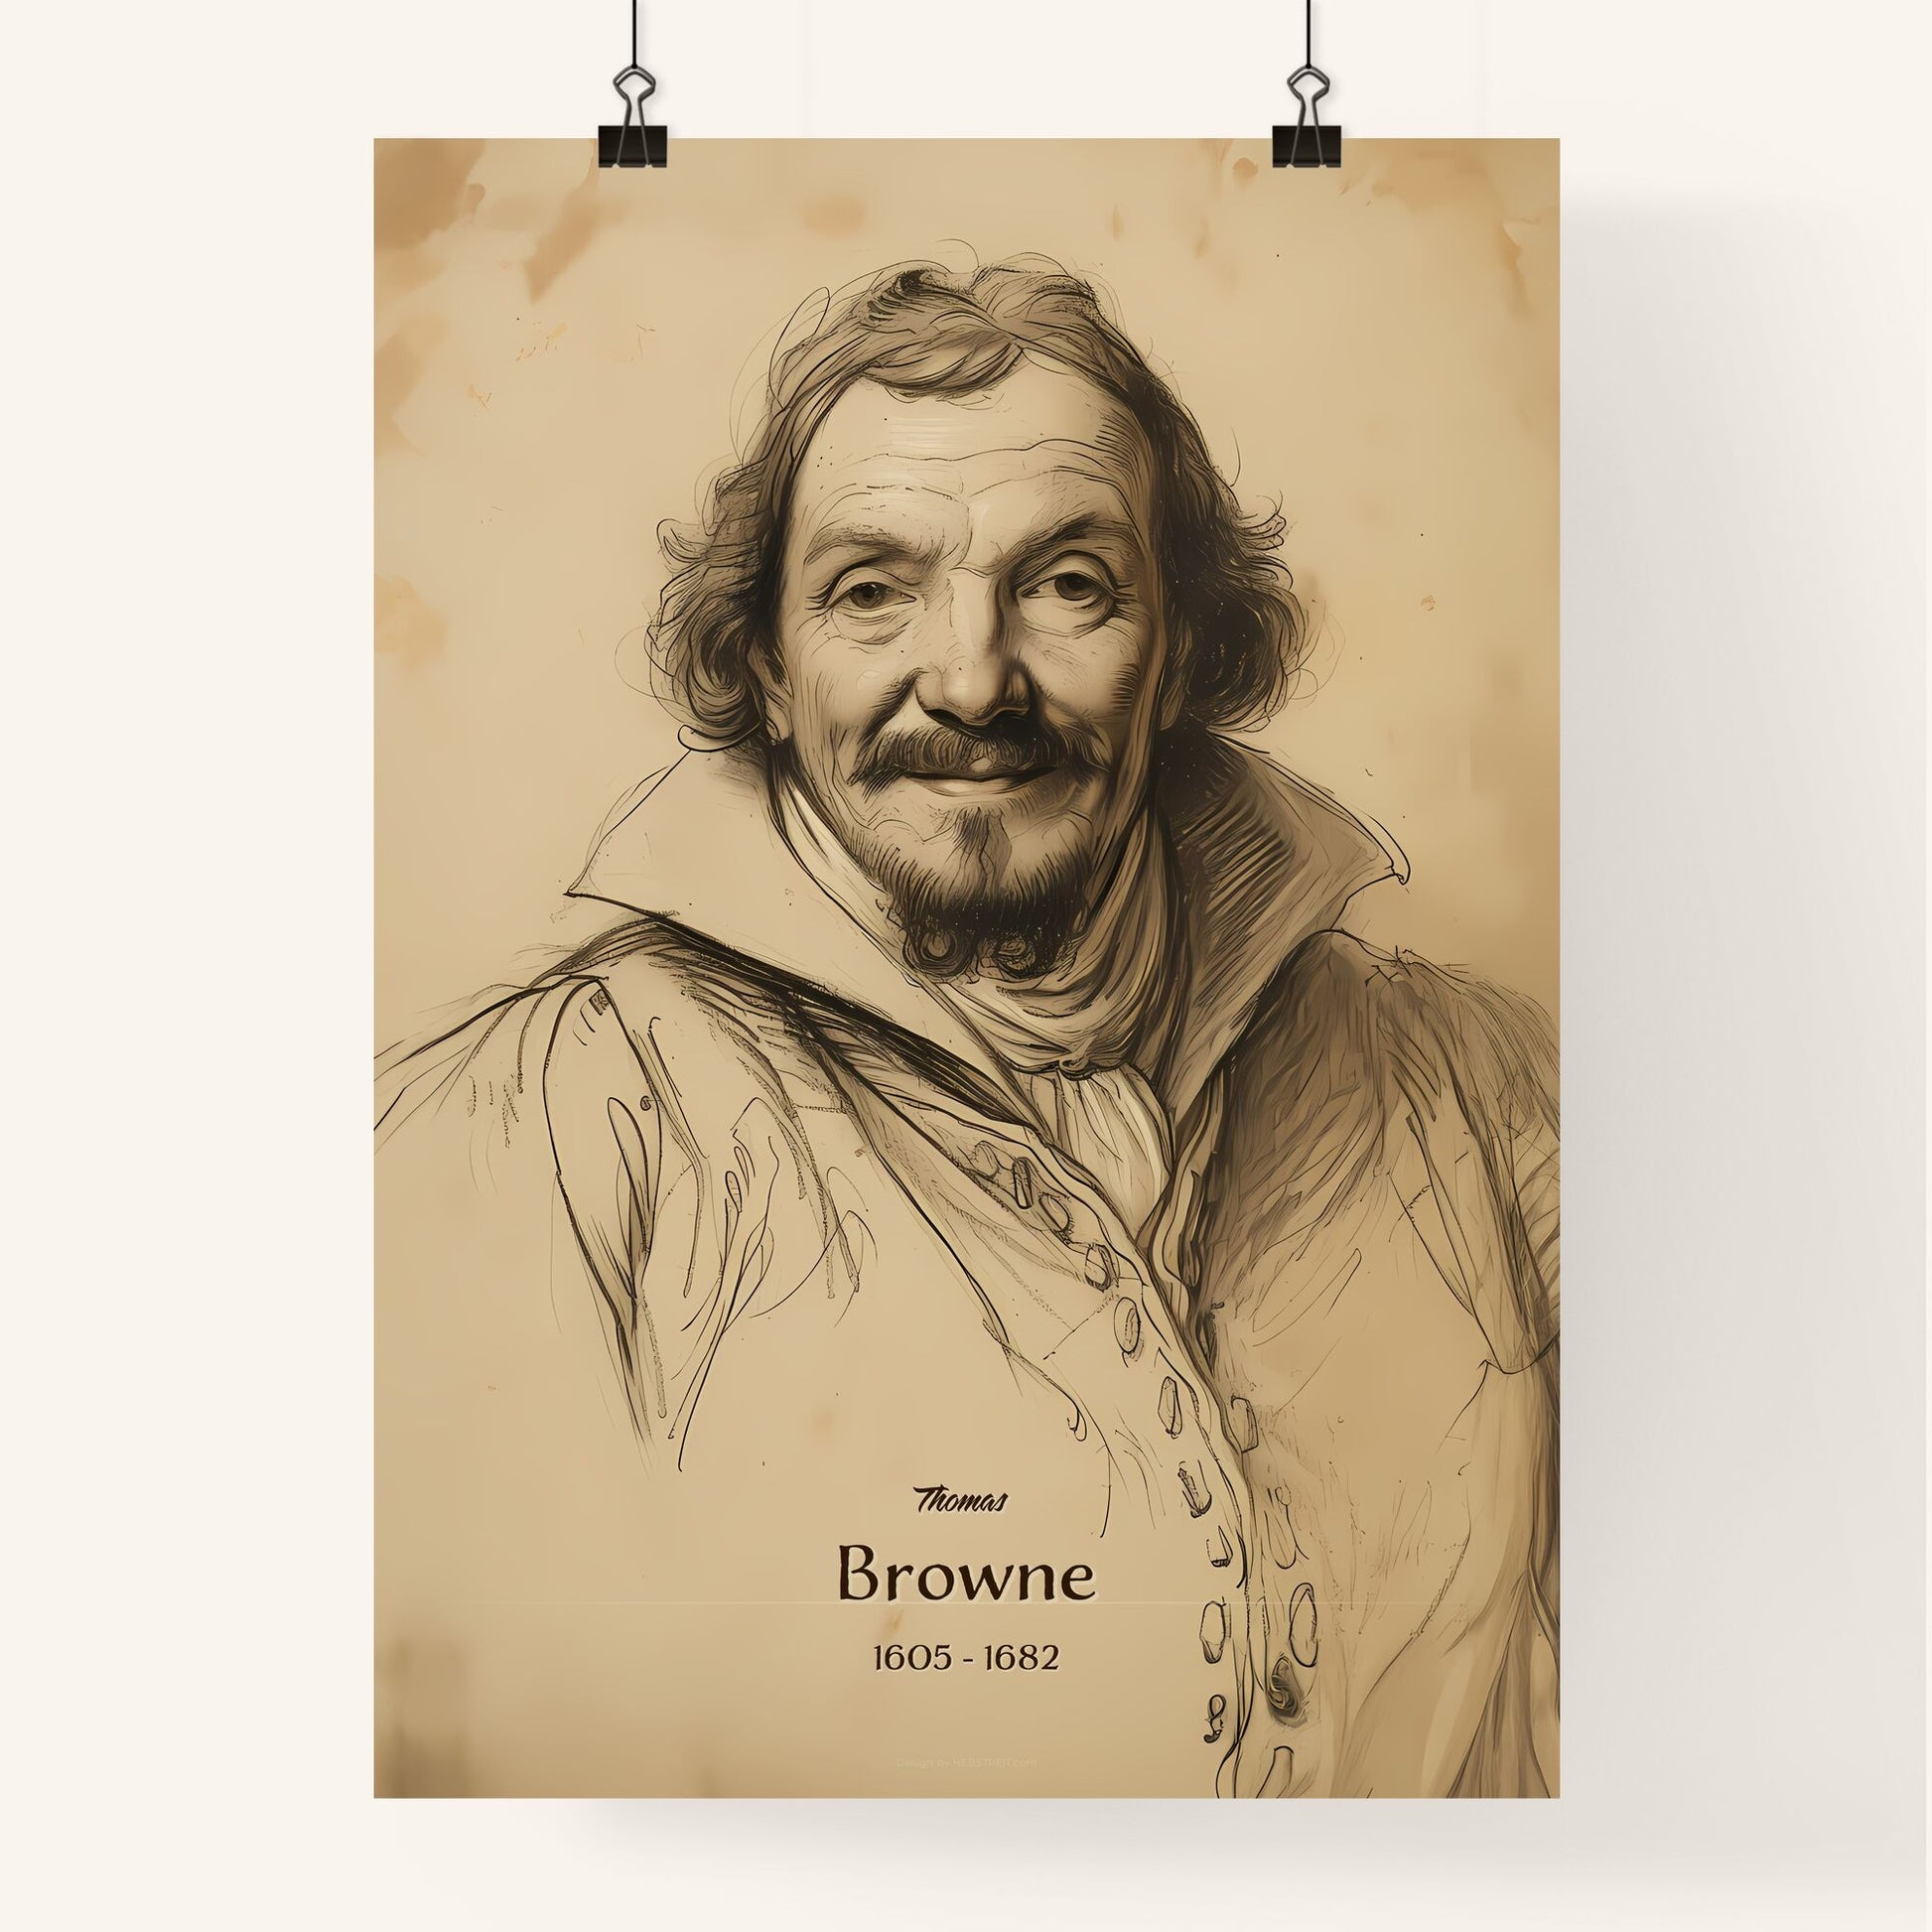 Thomas, Browne, 1605 - 1682, A Poster of a drawing of a man Default Title